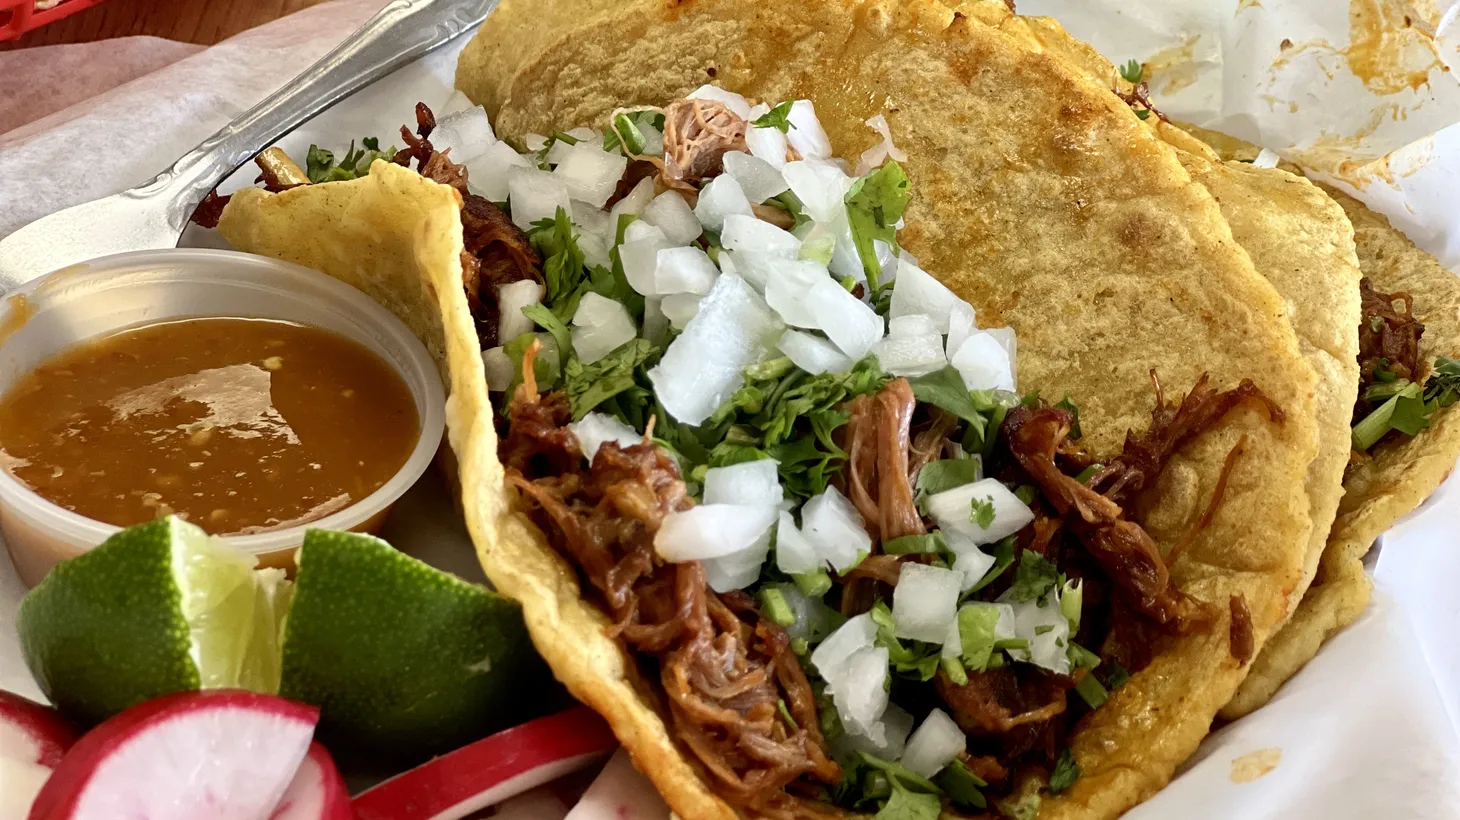 The birria tacos at Birriería Lupita will set you back five dollars but weigh in at half a pound.